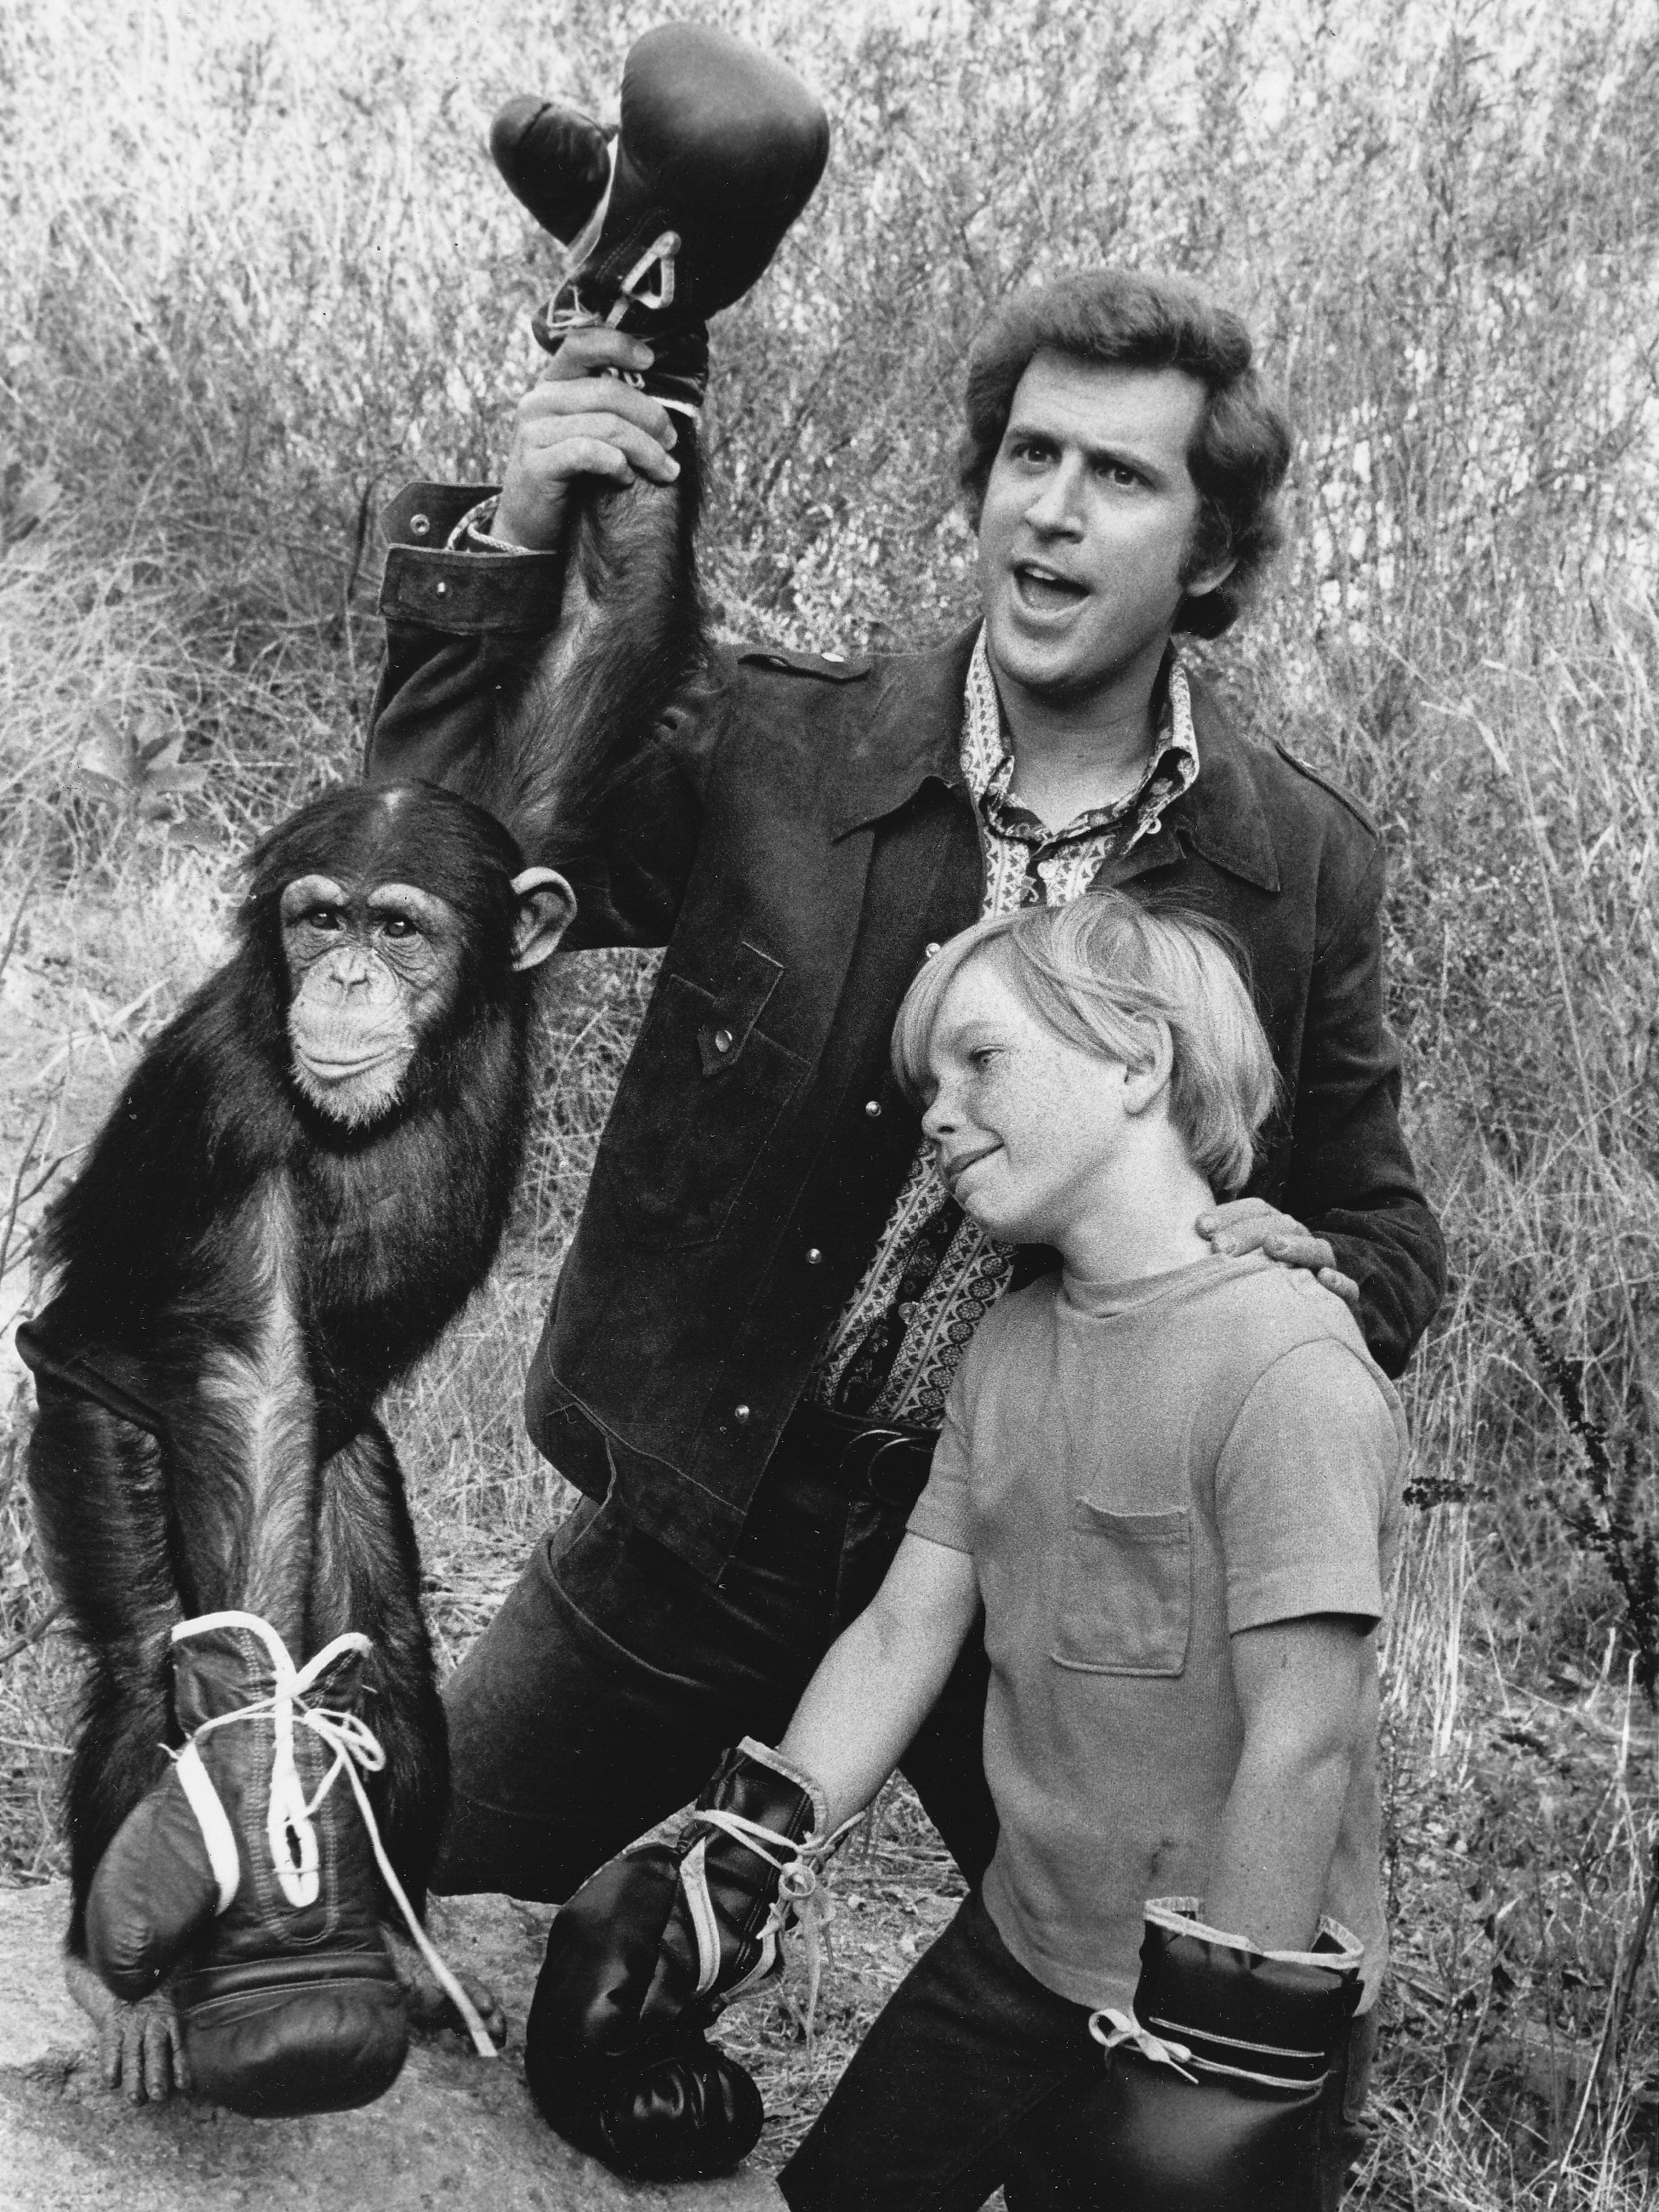 Ted Bessell and Scott Kolden with chimpanzee performer, "Buttons", promoting the 1972 premiere of the television series "Me and the Chimp" | Photo: Wikimedia Commons